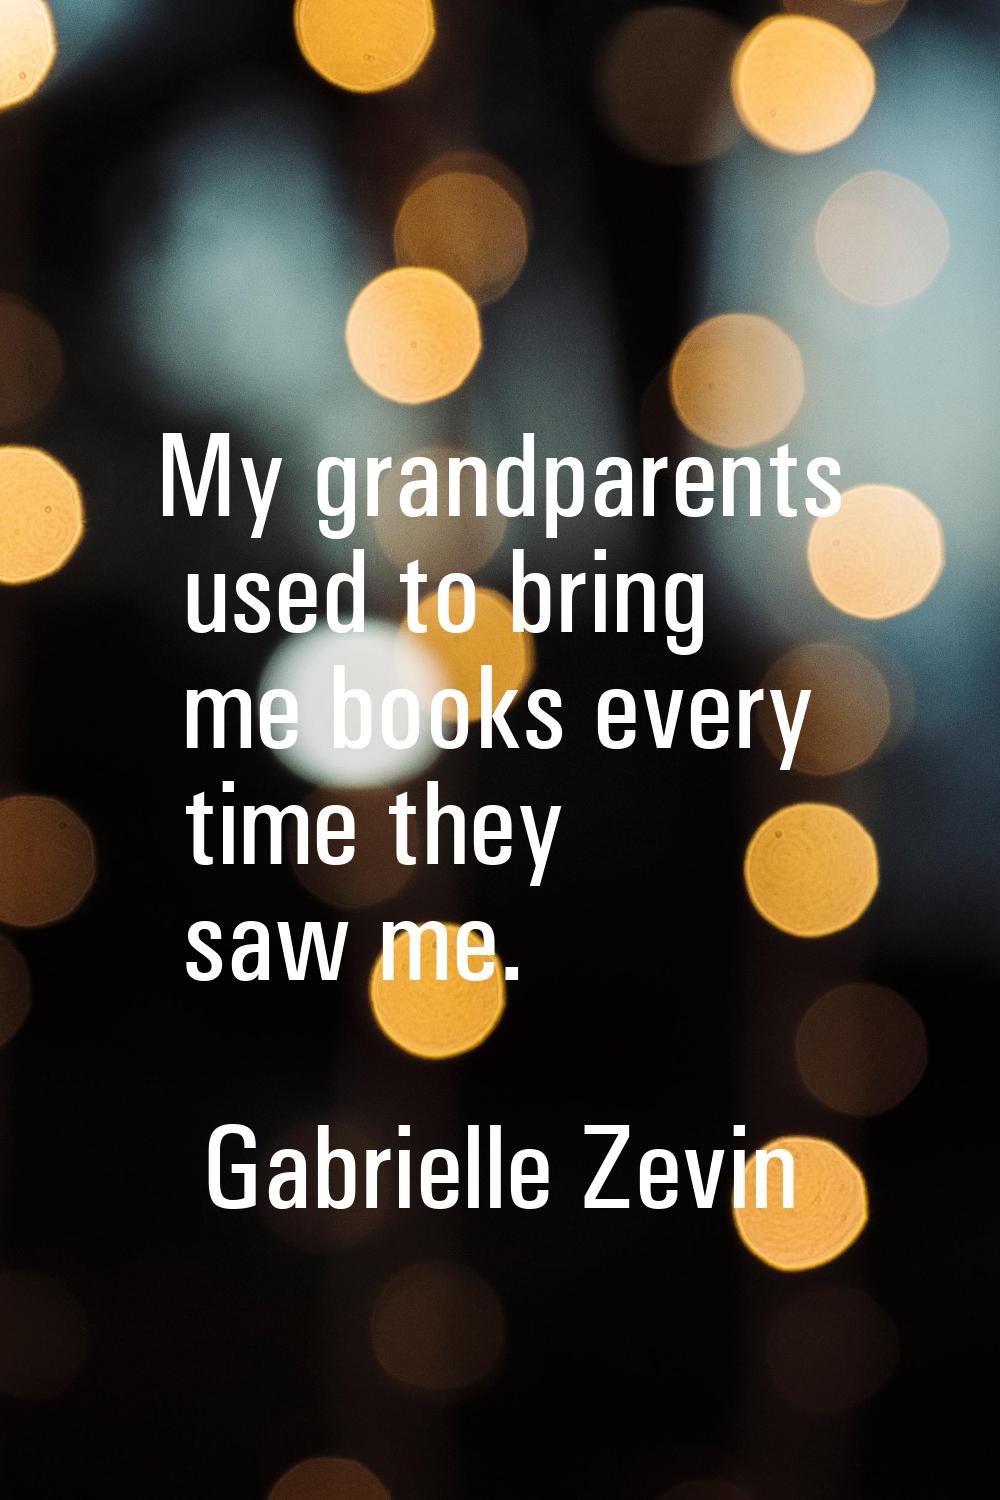 My grandparents used to bring me books every time they saw me.